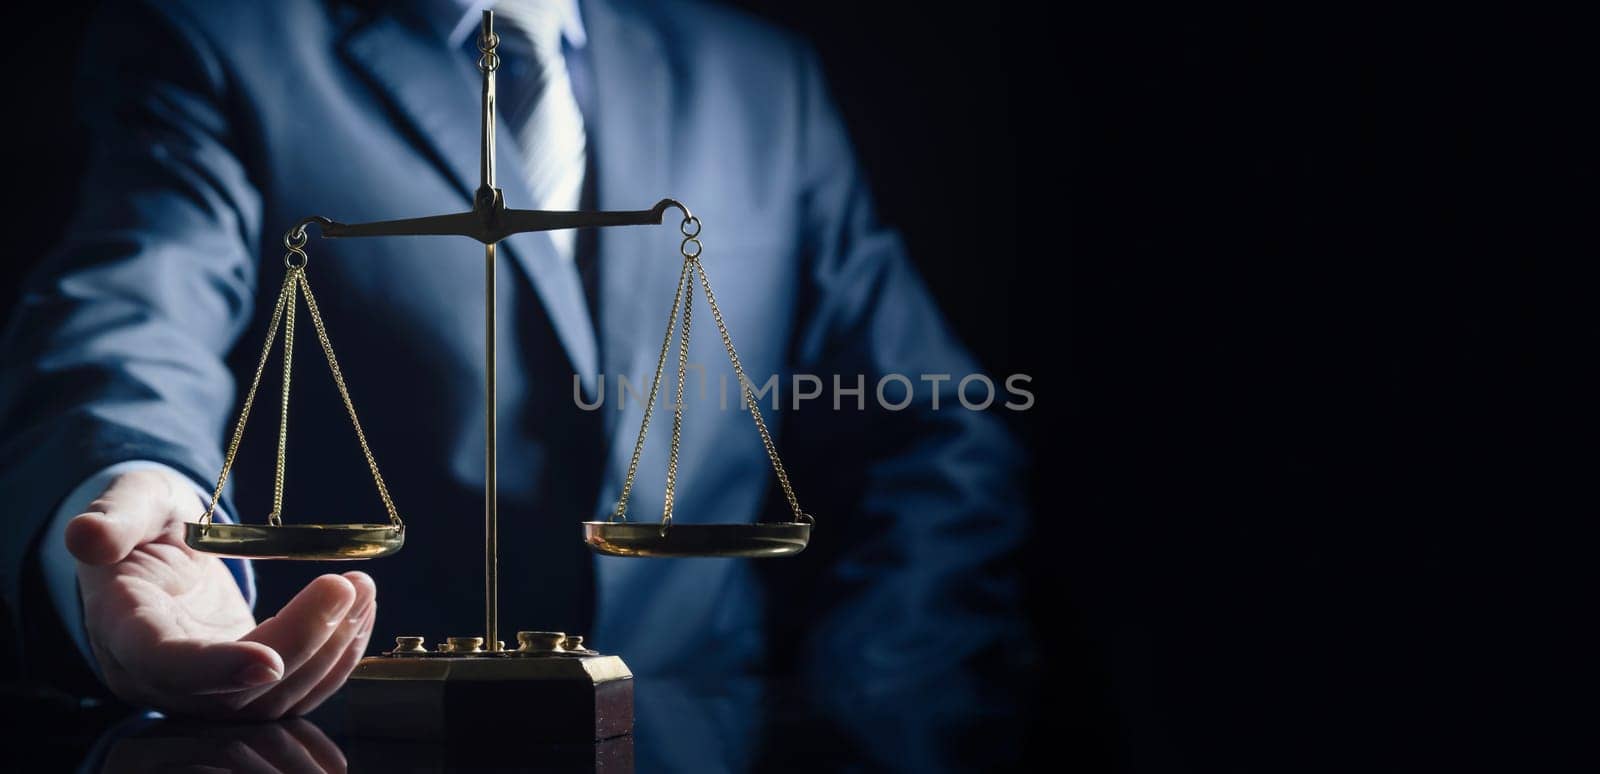 Weight scale of justice, lawyer in background by simpson33